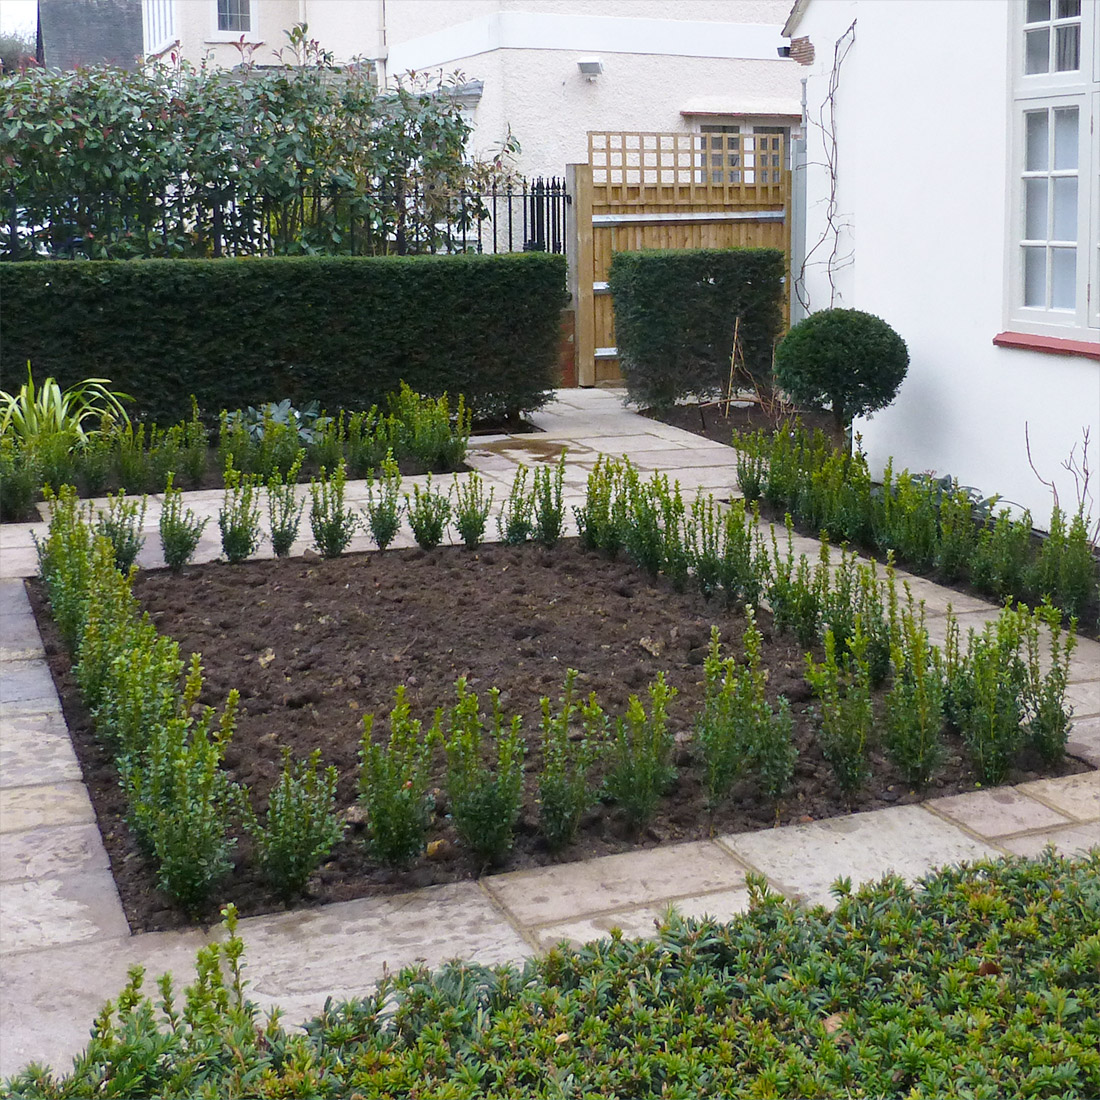 The box parterre with speciment planting